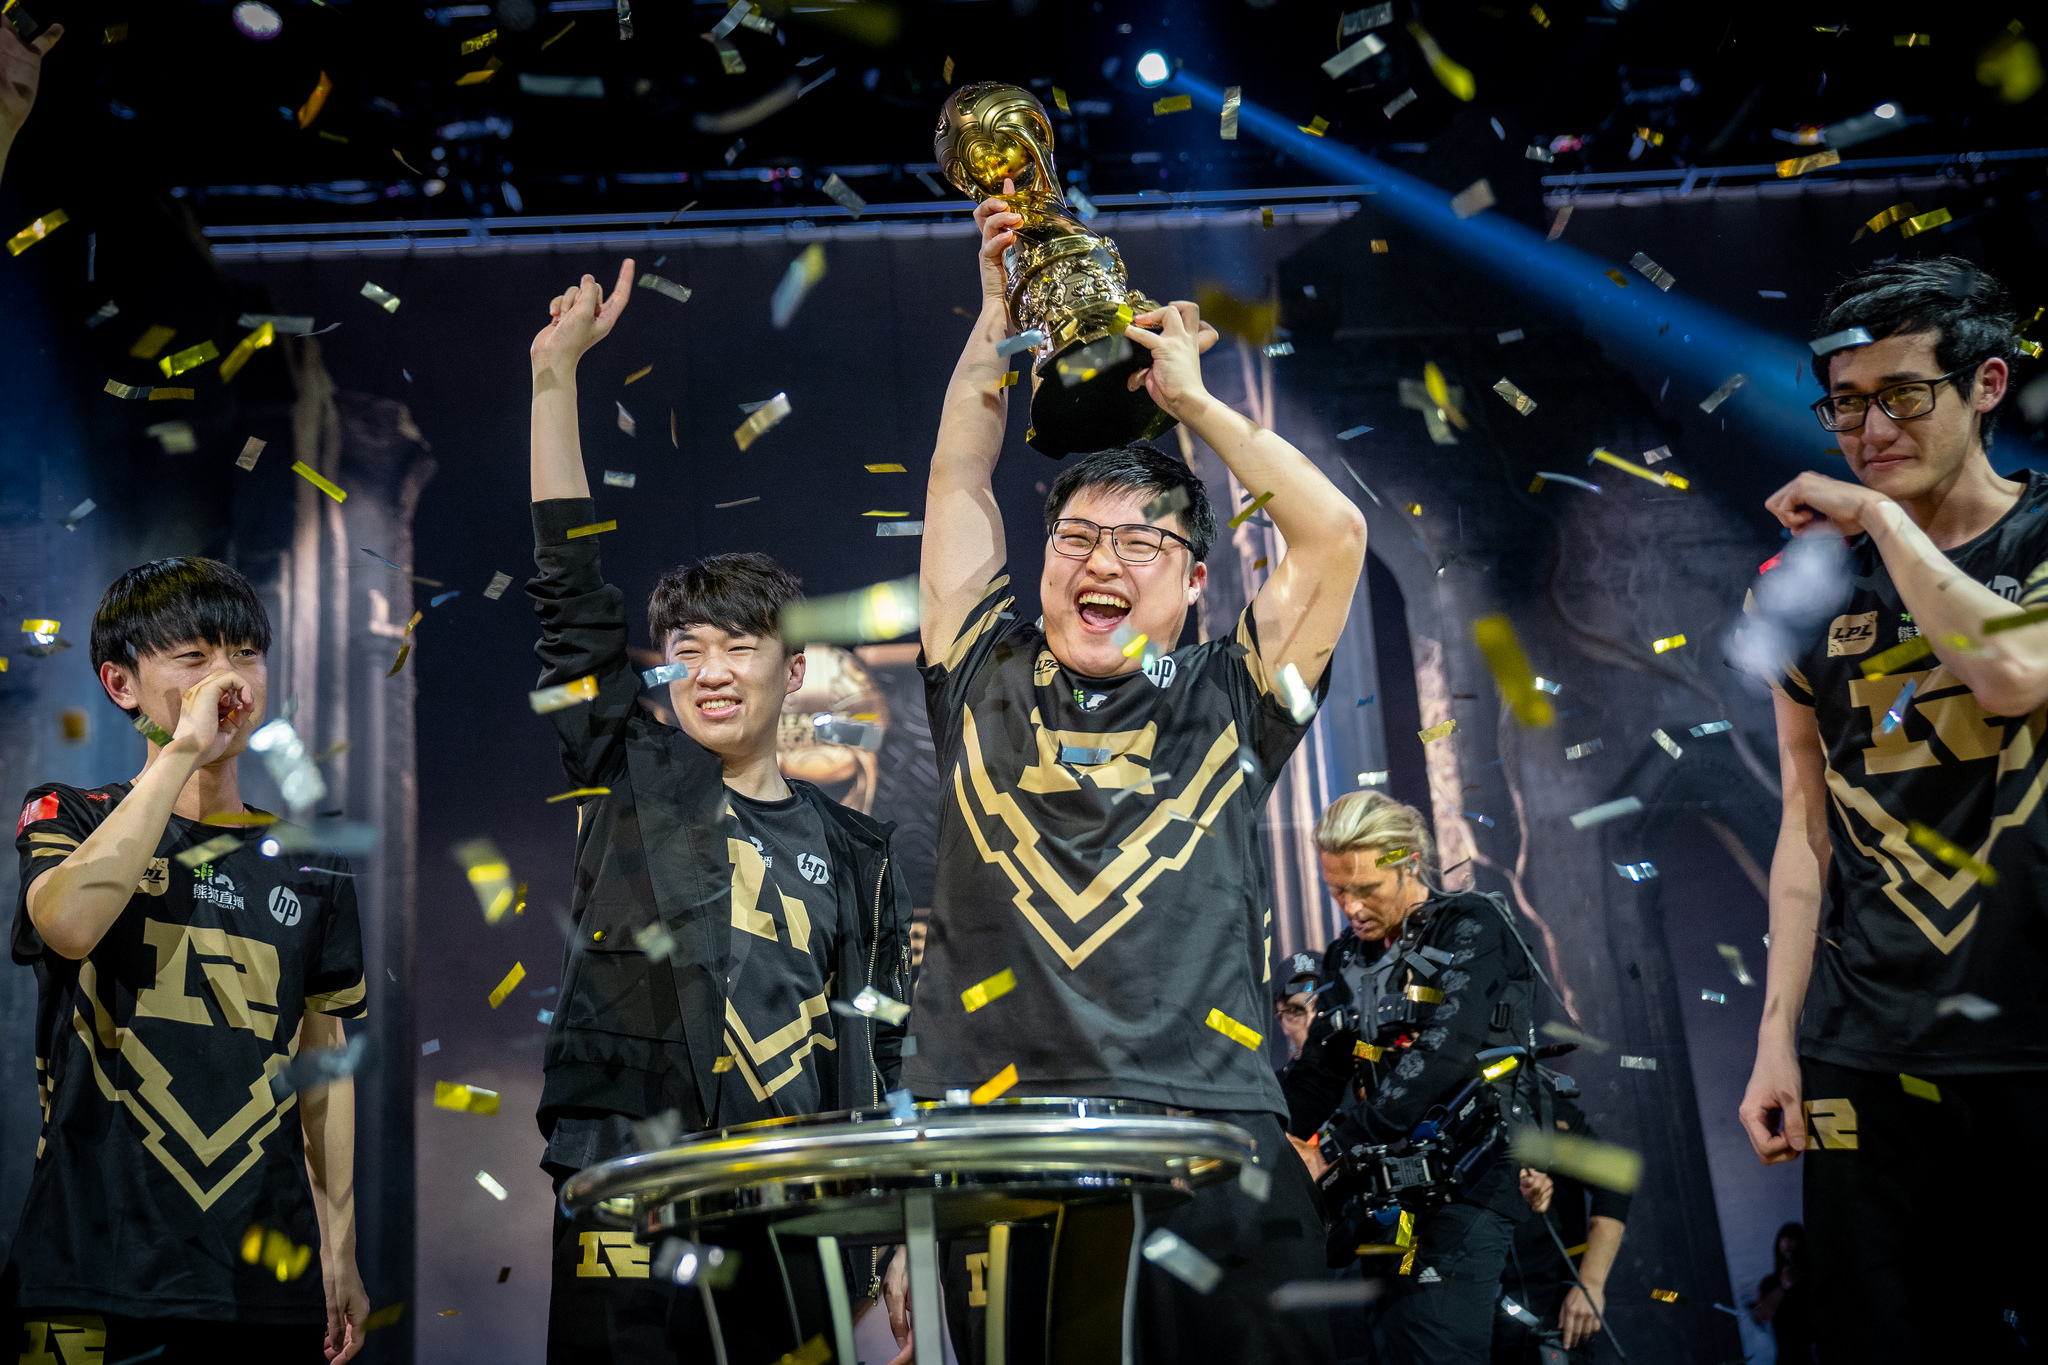 Uzi finally meets his destiny by claiming the MSI crown with RNG Dot